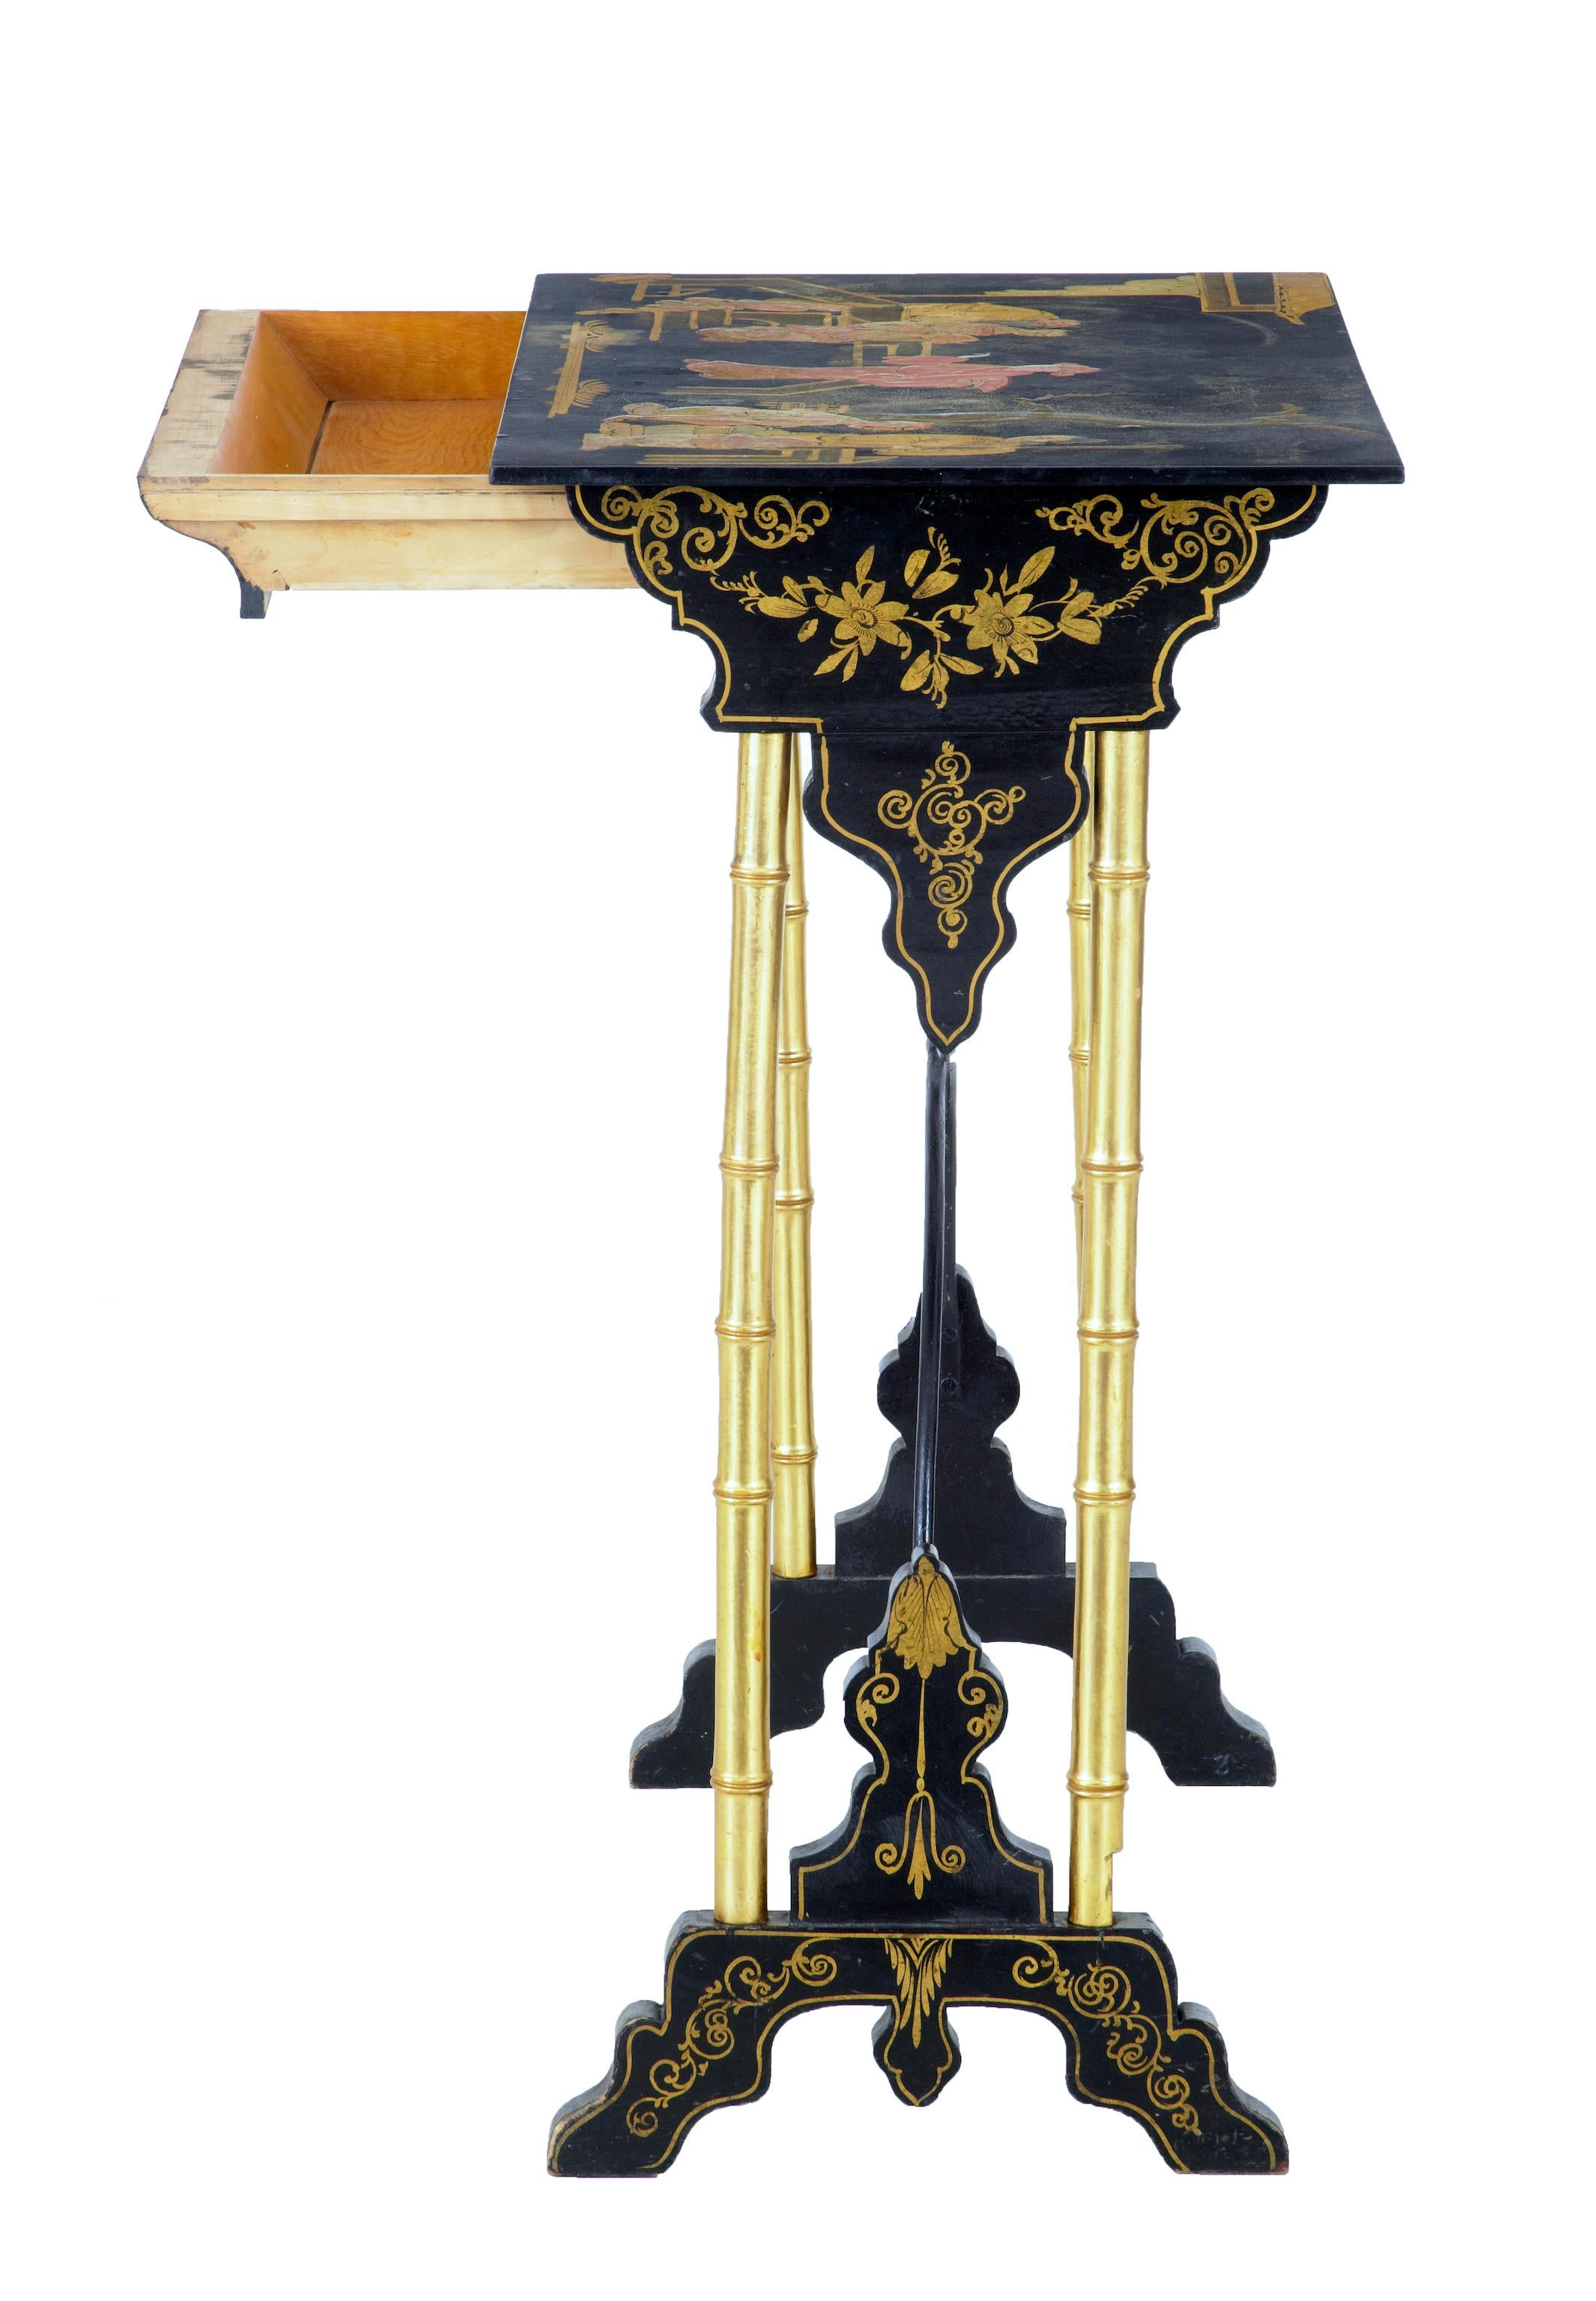 Late 19th century Japanese black lacquer and gilt occasional table circa 1890.

Good quality sewing table. Gilt and painted traditional scene to the top. Single drawer to the front. Hand painted florals to the sides and feet, gilt faux bamboo legs